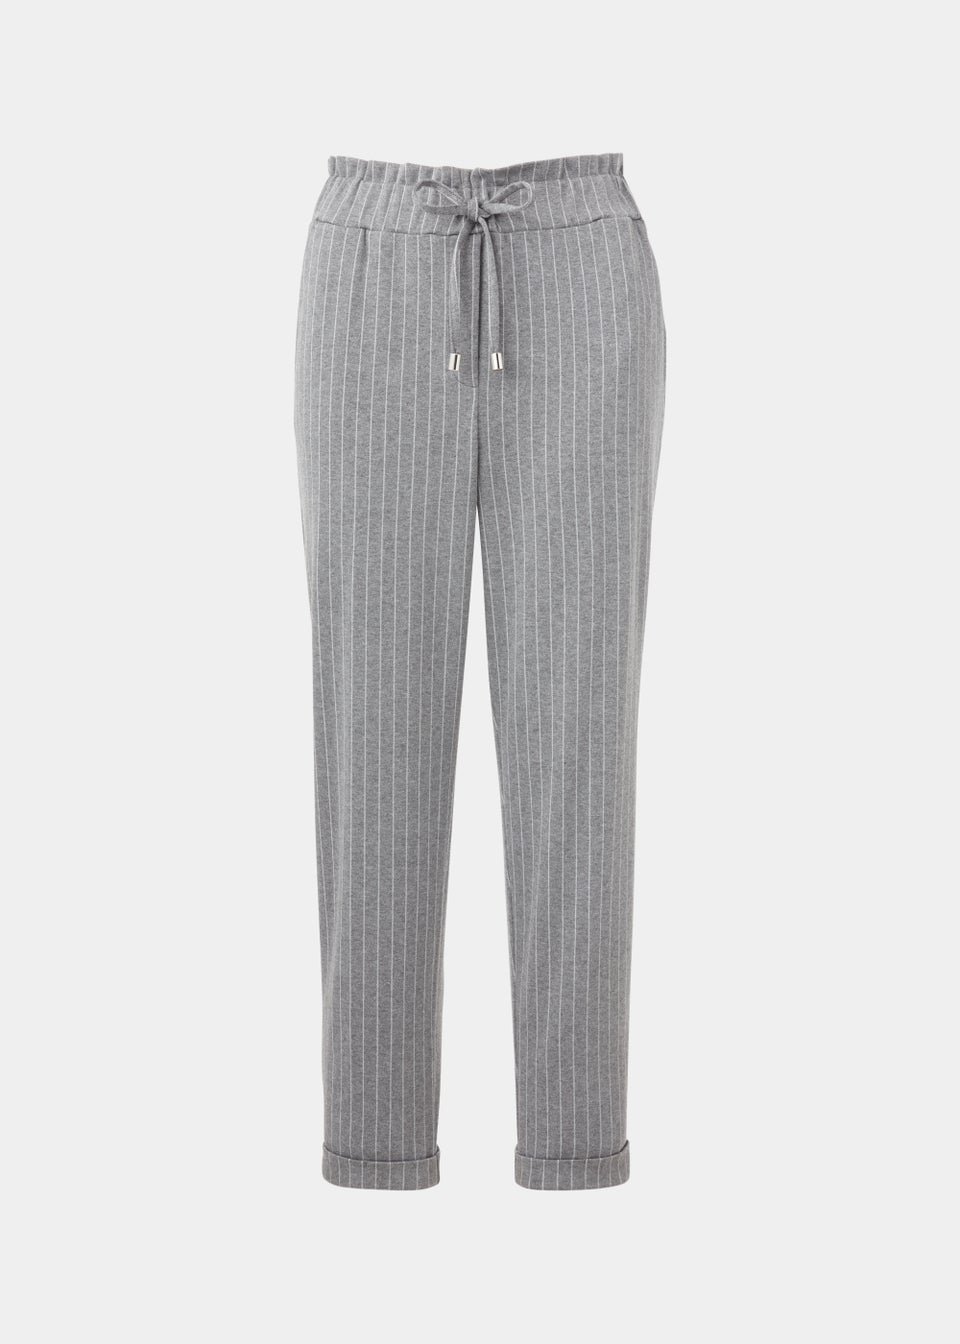 Grey & White Paperbag Trousers